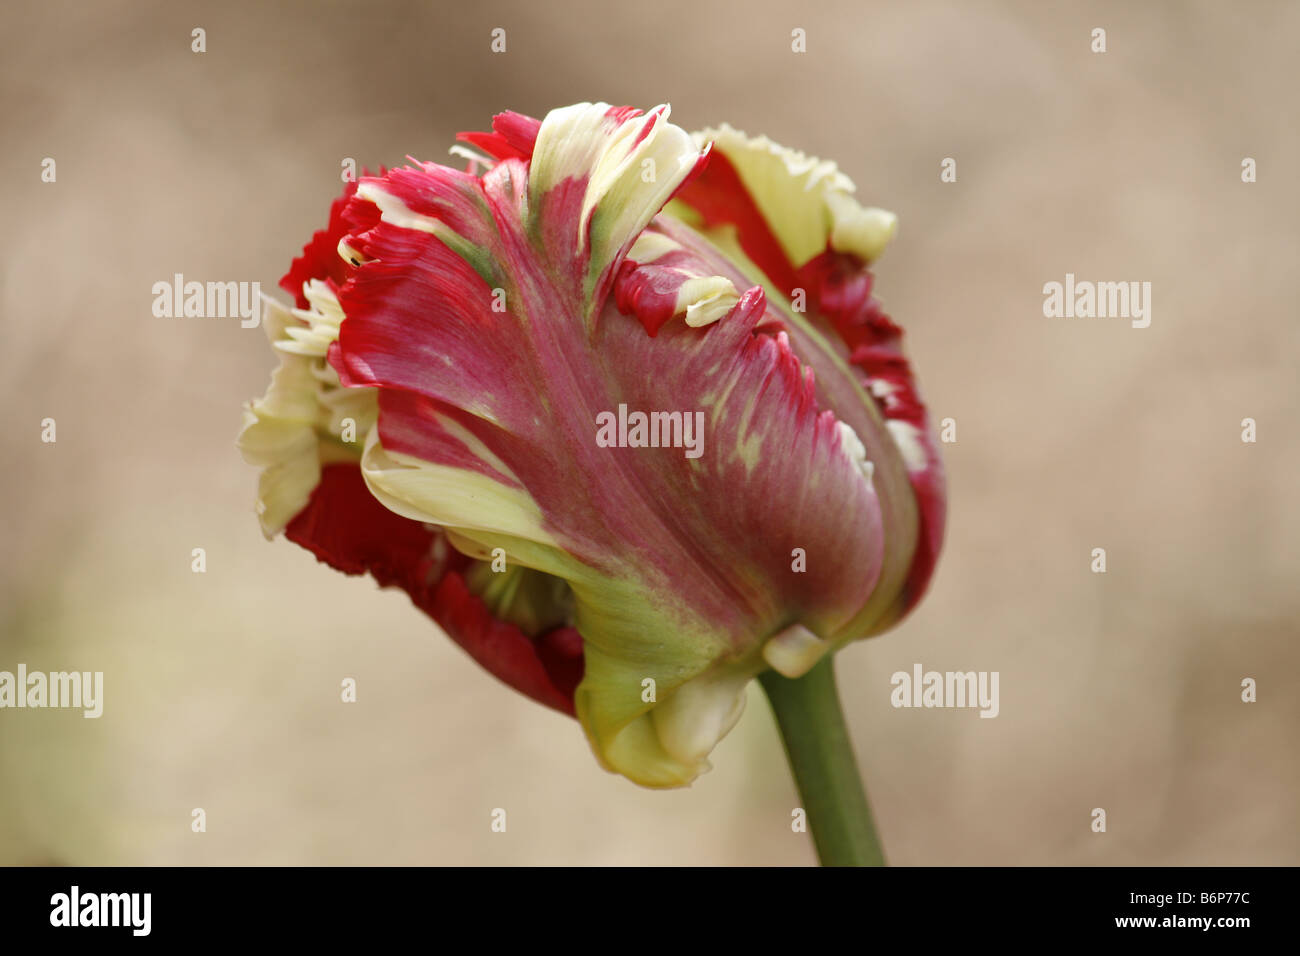 Red, green and white tulip growing in a garden with natural background. Stock Photo